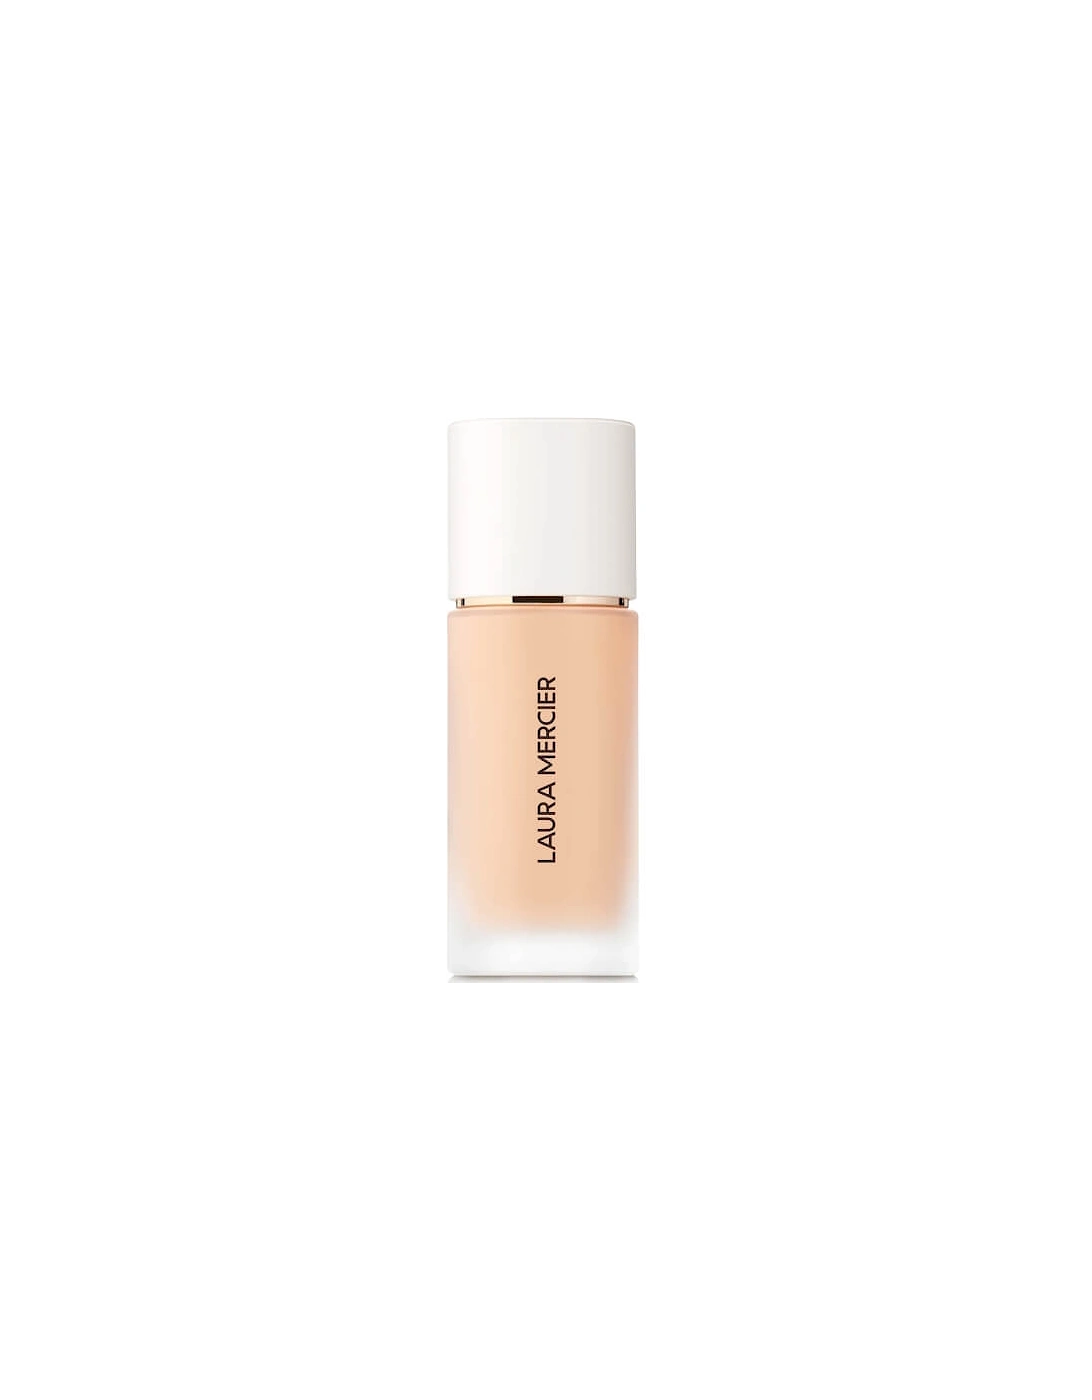 Real Flawless Foundation - 1N2 Vanille, 2 of 1